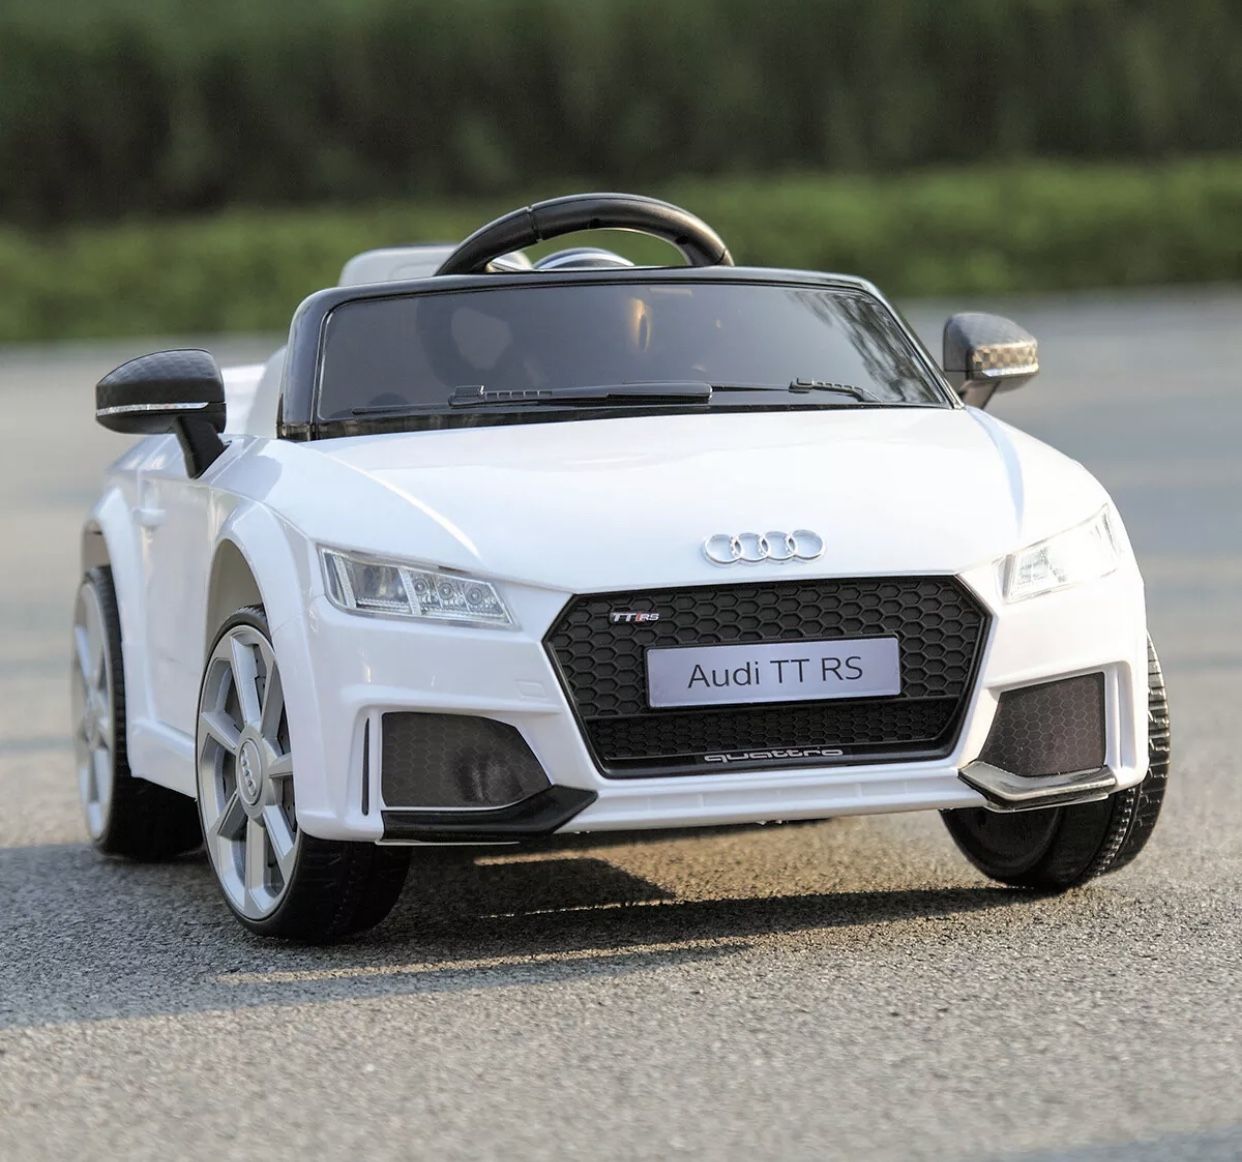 Power wheels, ride on toys, toy car, baby car, toddlers Electric kids car Audi TT RS 12V remote control